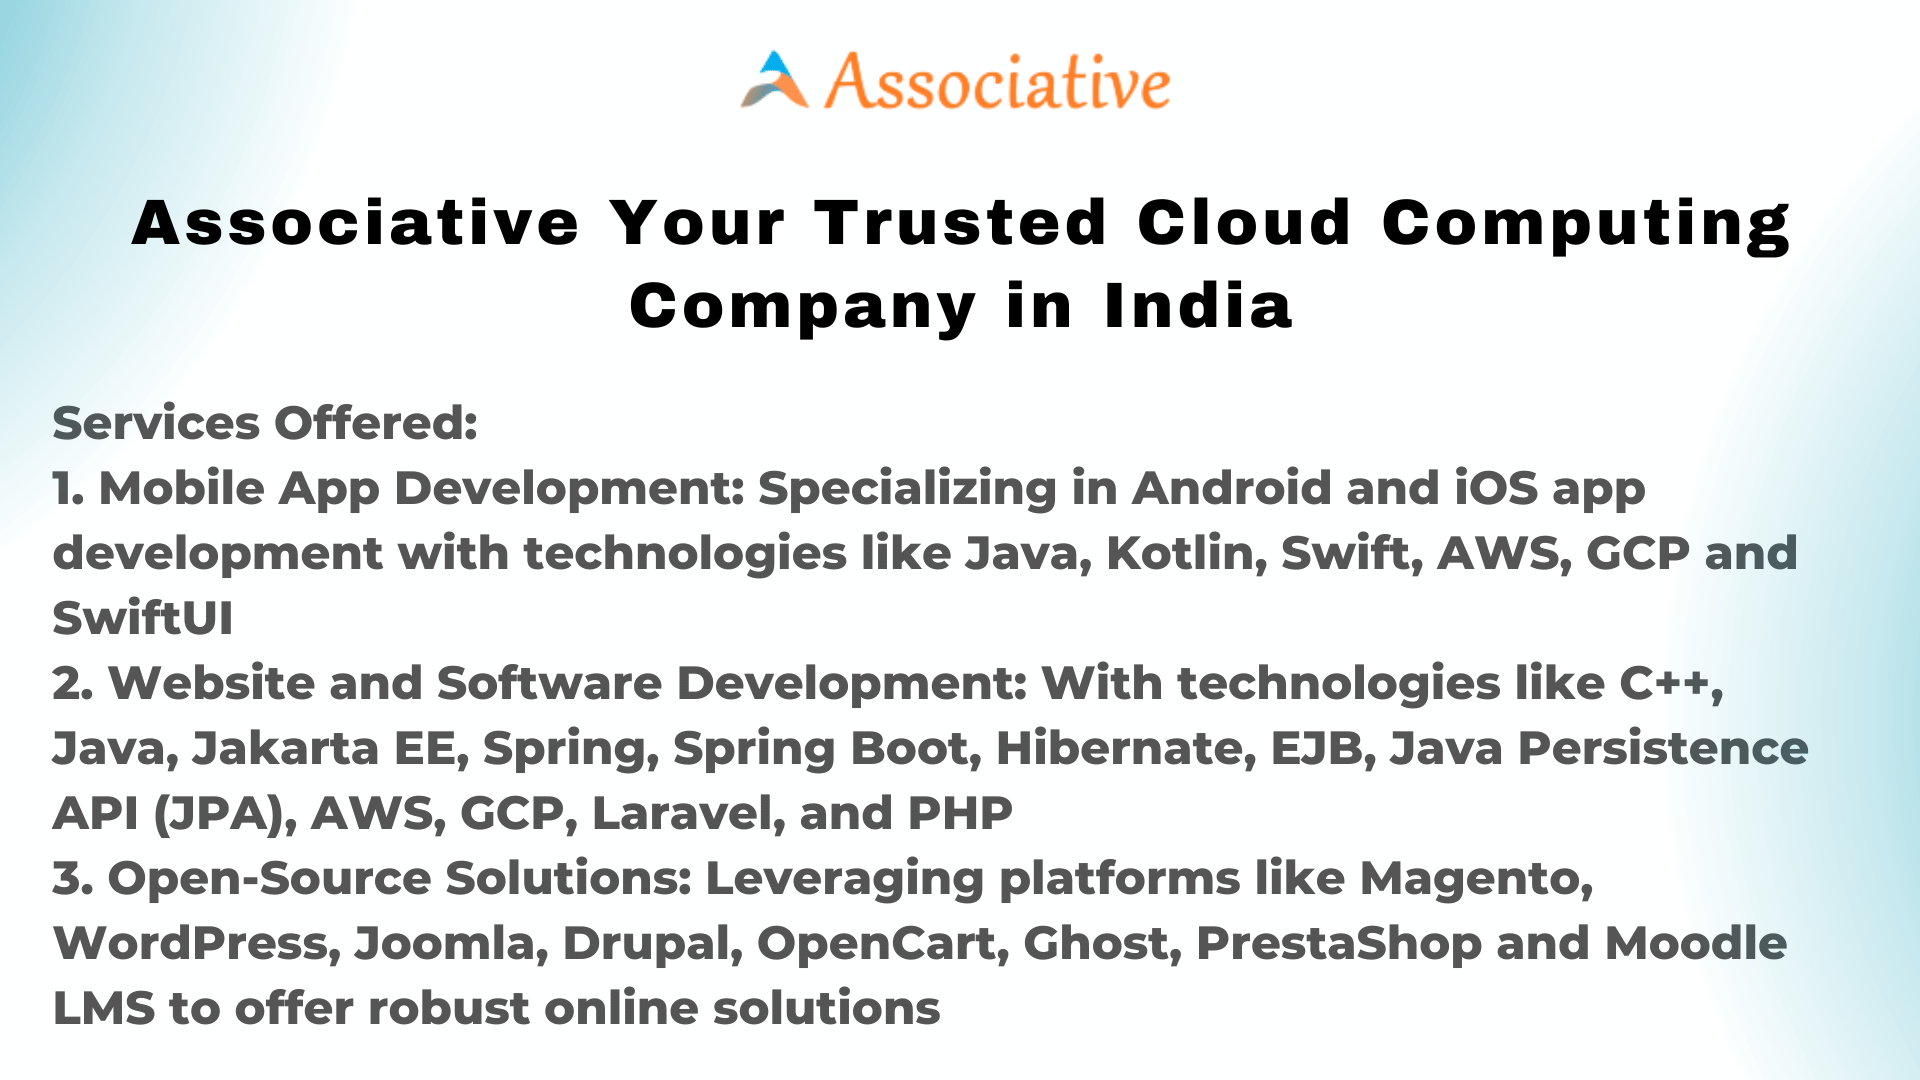 Associative Your Trusted Cloud Computing Company in India